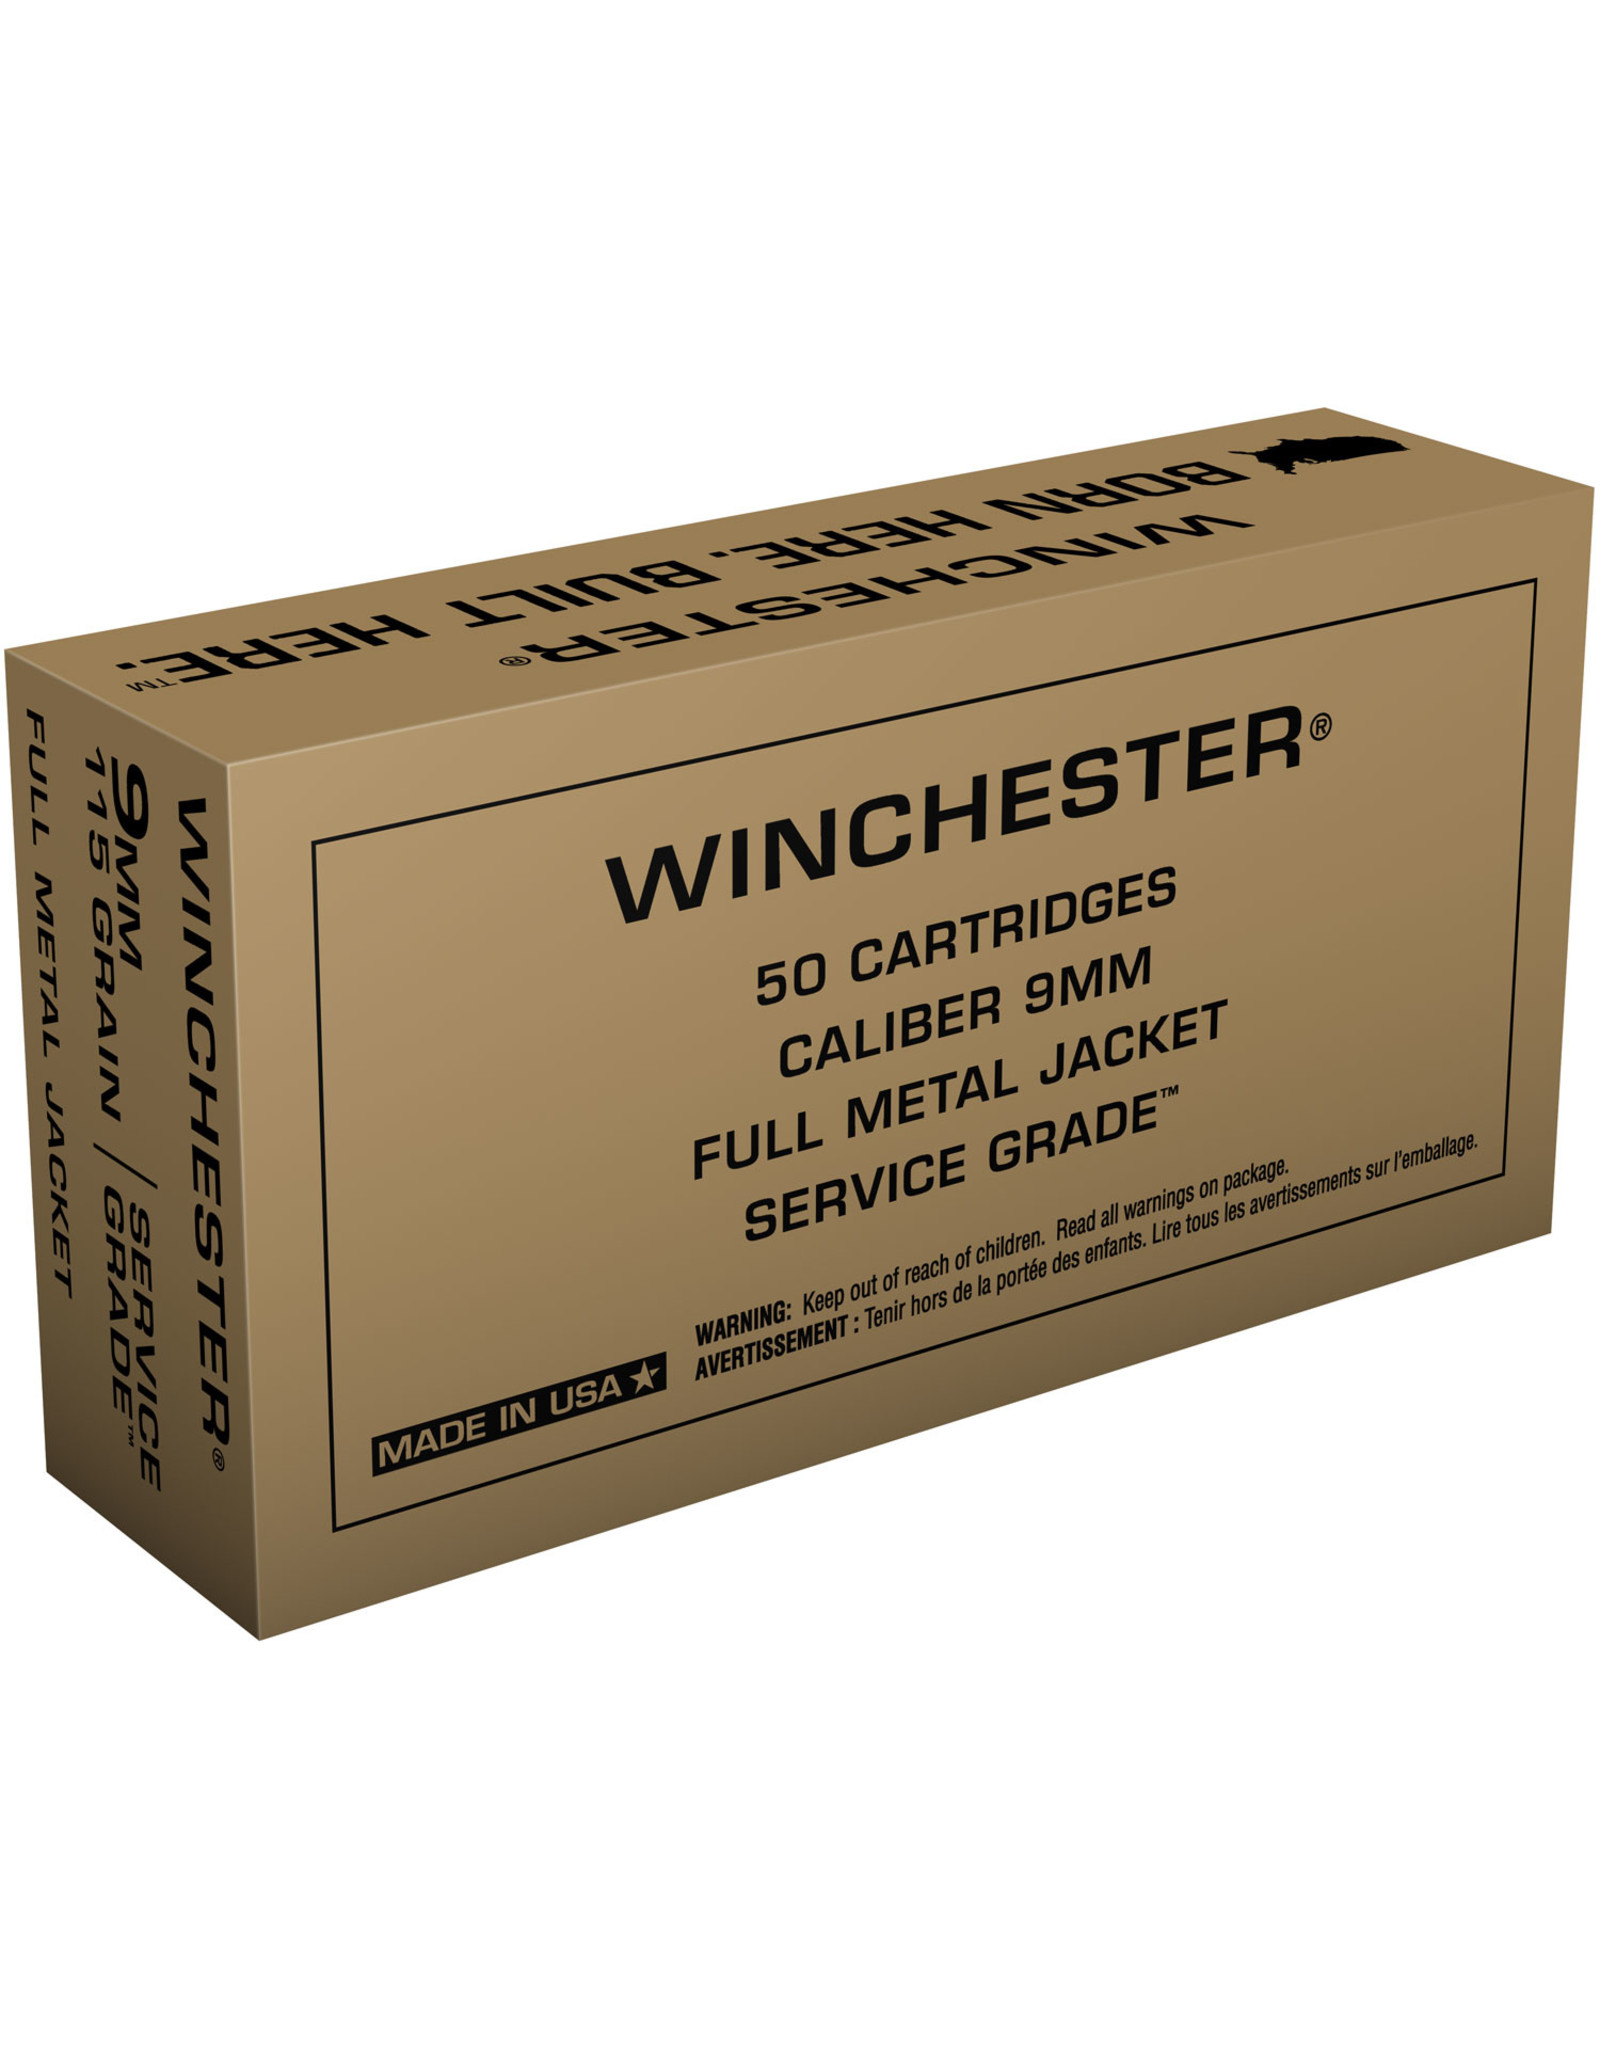 WINCHESTER Winchester 9mm 115gr FMJ - 50 Count